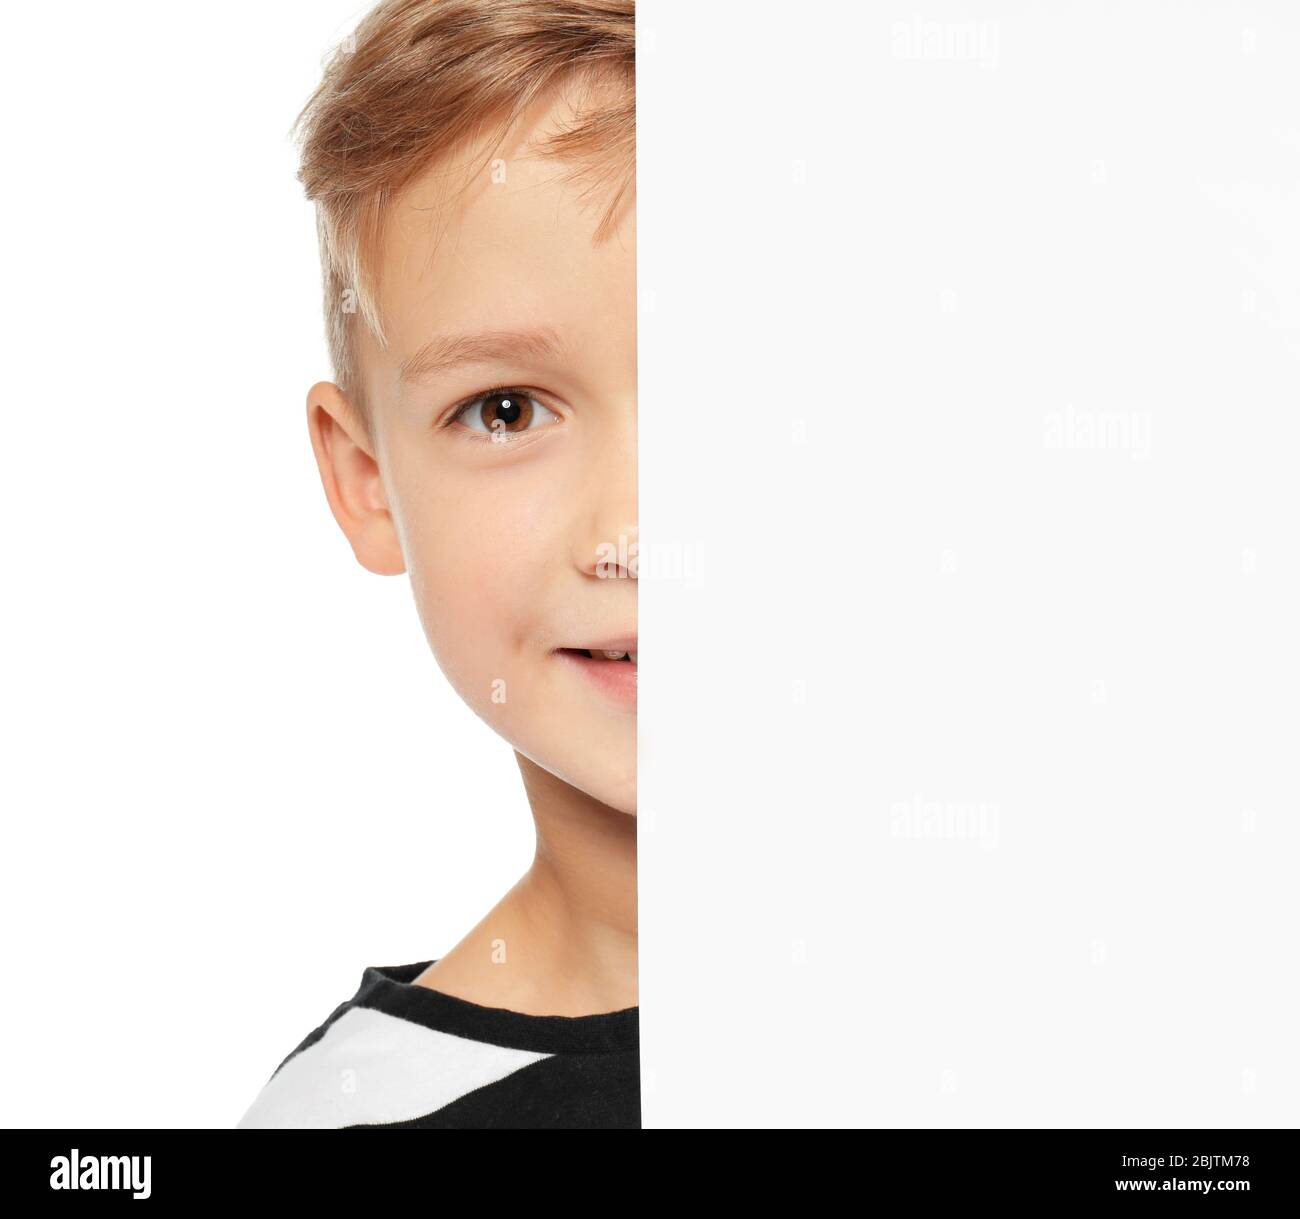 Cute boy with blank advertising board on white background Stock Photo